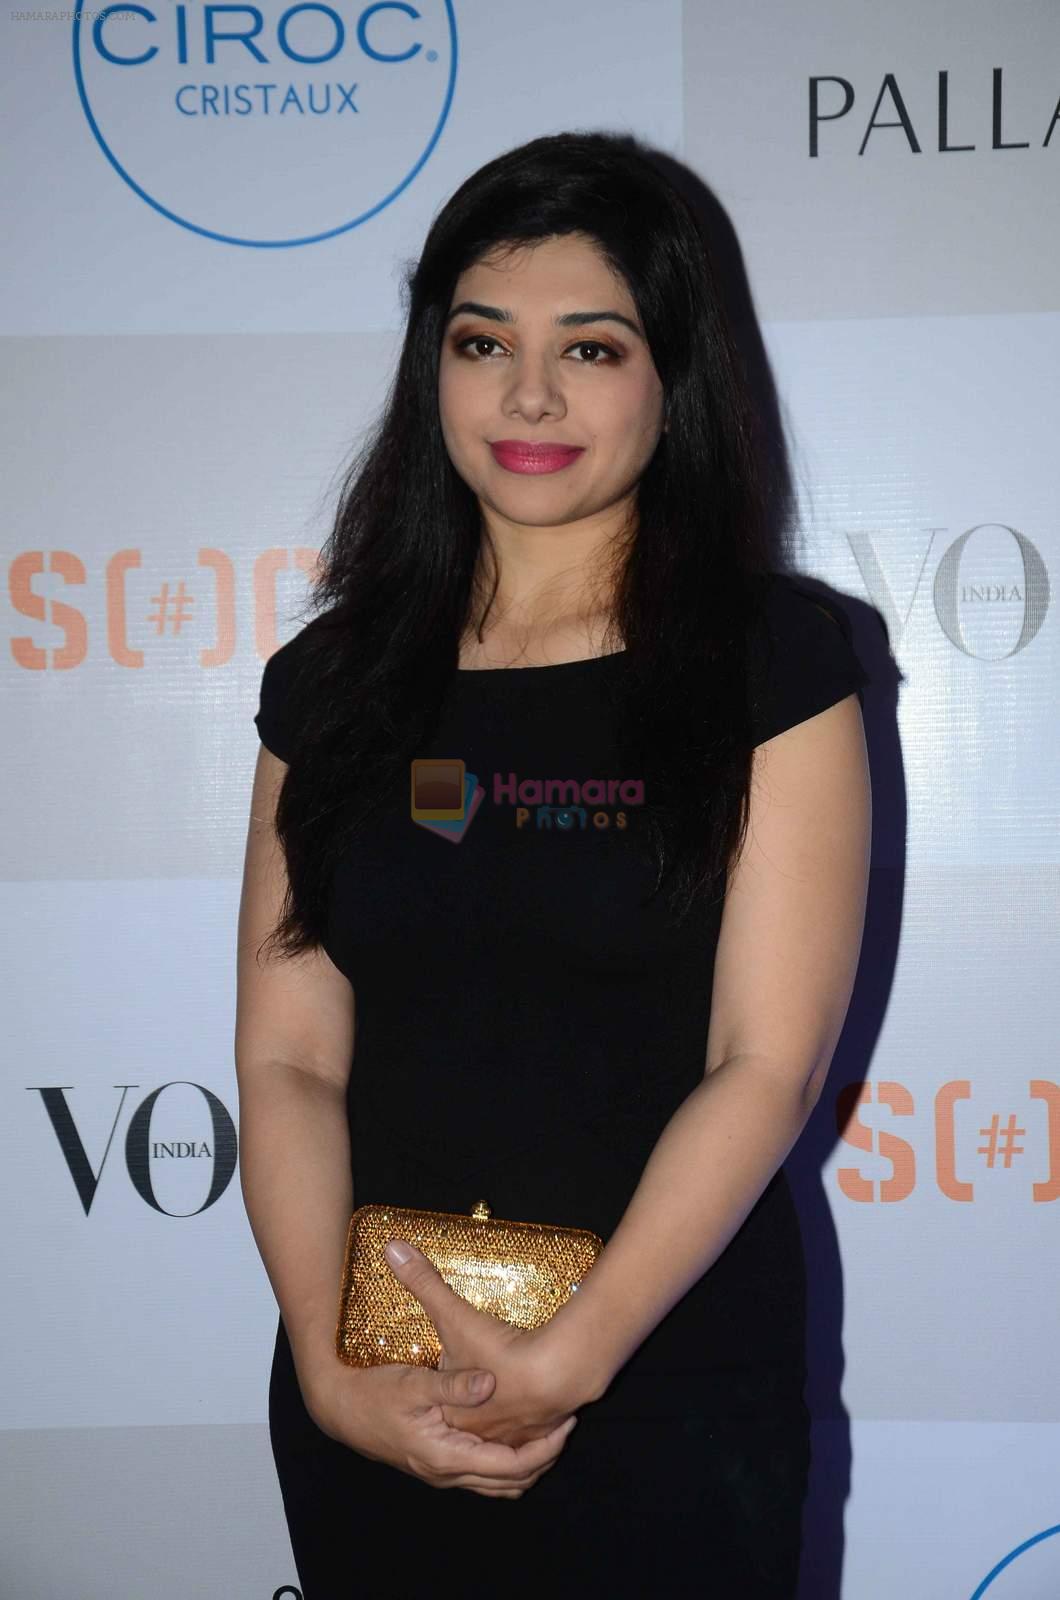 at Fashion's Night Out 2015 by Vogue in Palladium on 2nd Sept 2015